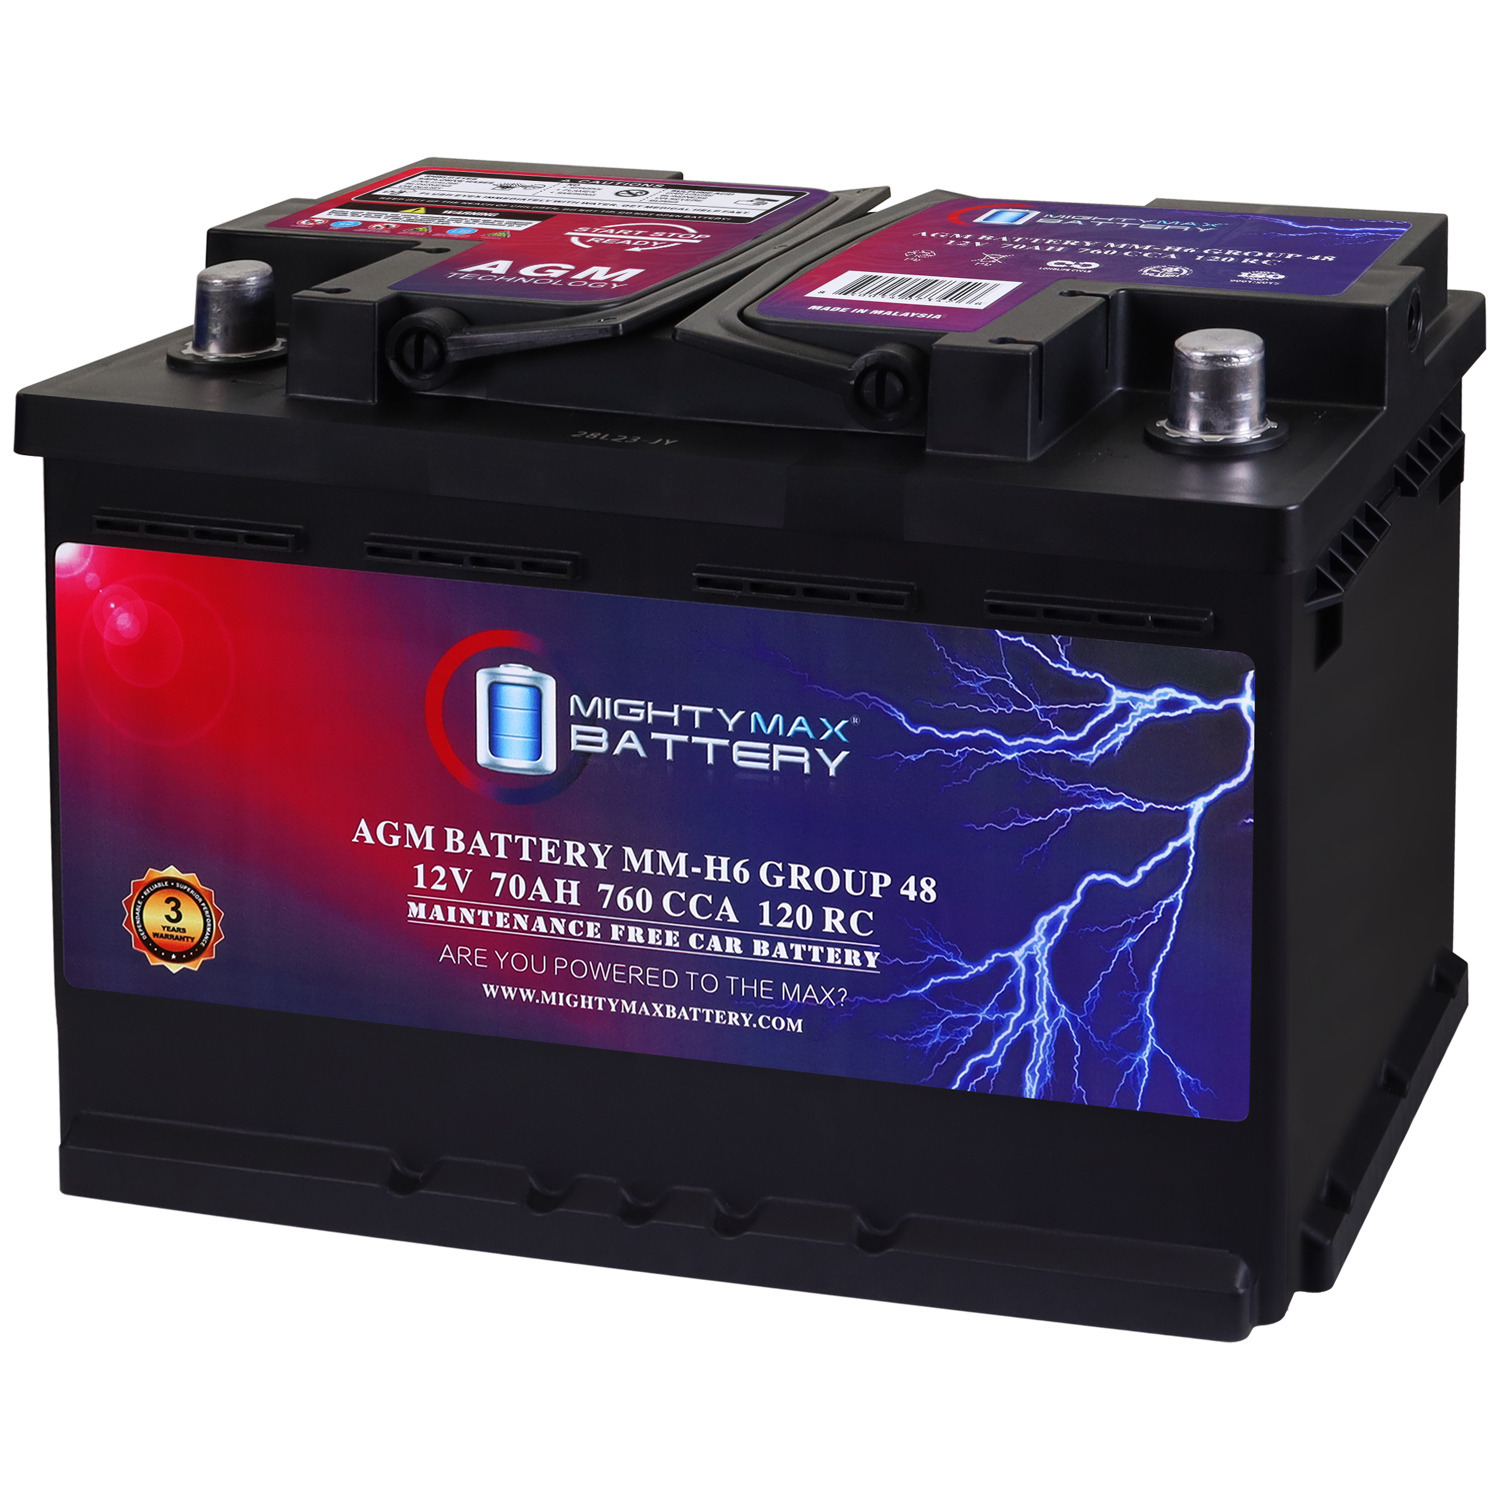 MM-H6 Group 48 12V 70AH 120RC 760CCA Replacement Battery Compatible with BMW 335xi 07-08